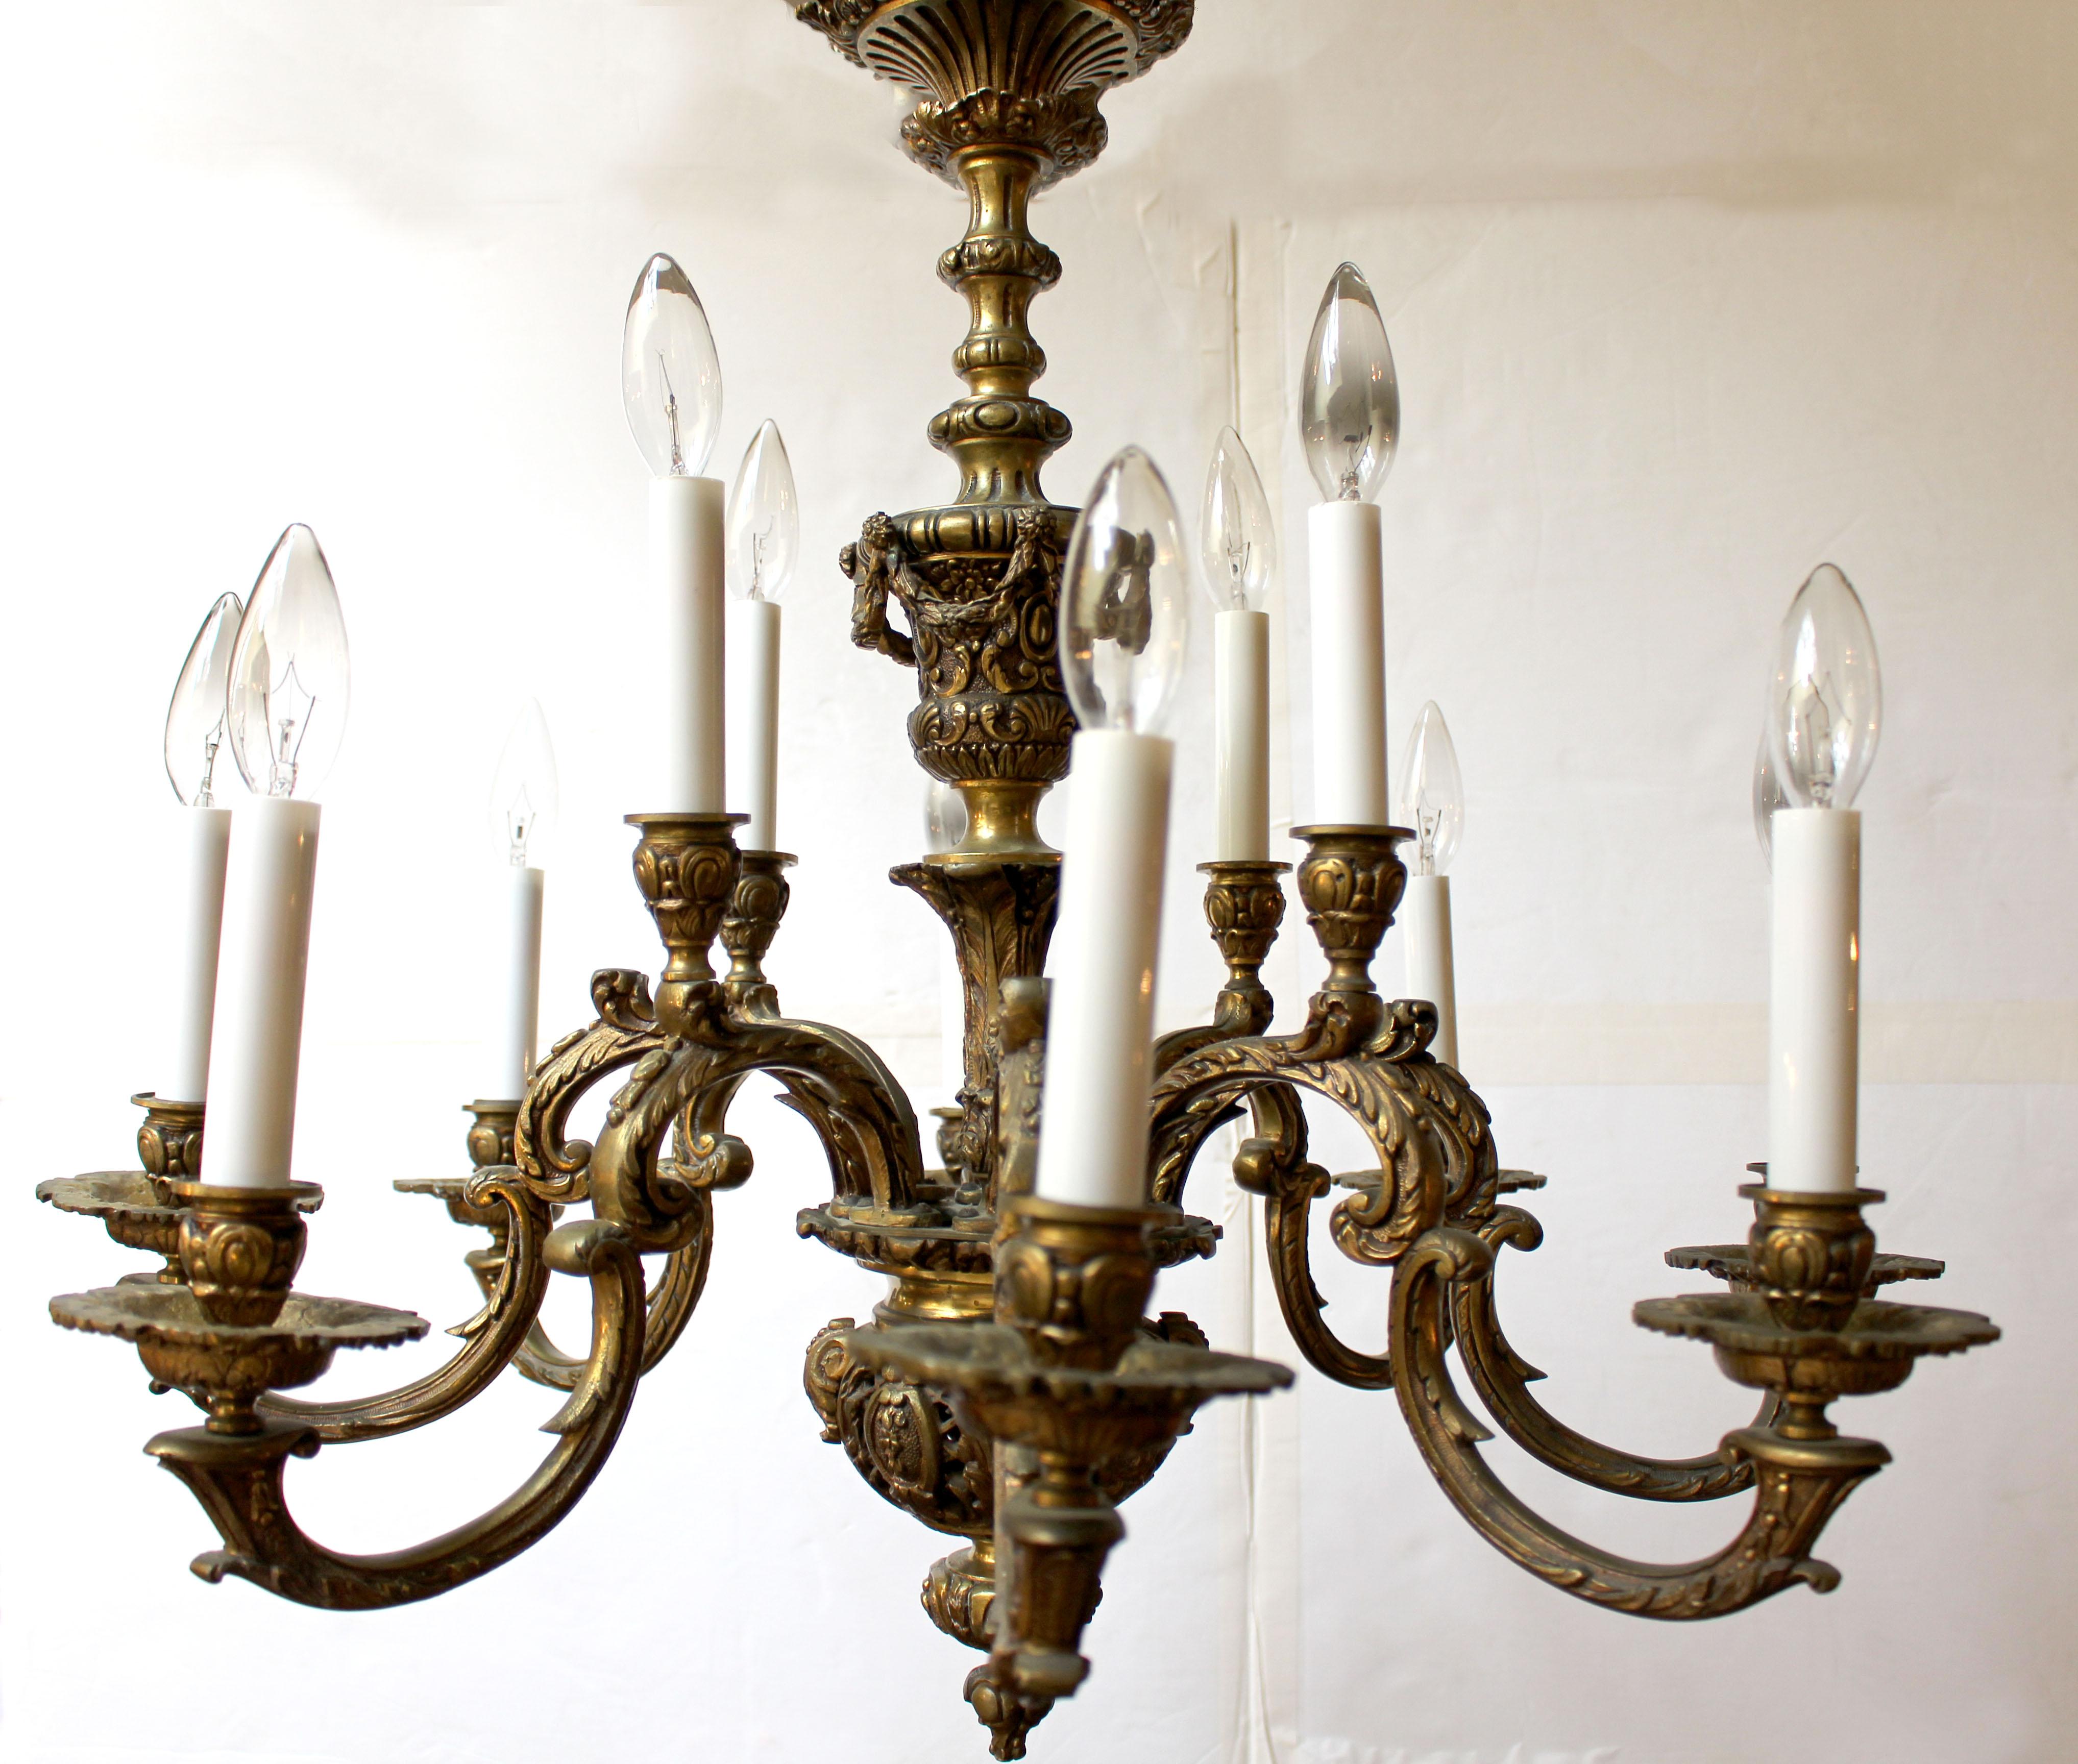 Circa 1900 French cast bronze 12-light chandelier, Louis XIV style. Baroque influence C-scroll based form, the whole decorated with floret, acanthus leaves & bellflowers. Robustly decorated central swagged urn. Includes a ceiling canopy.
Approx.